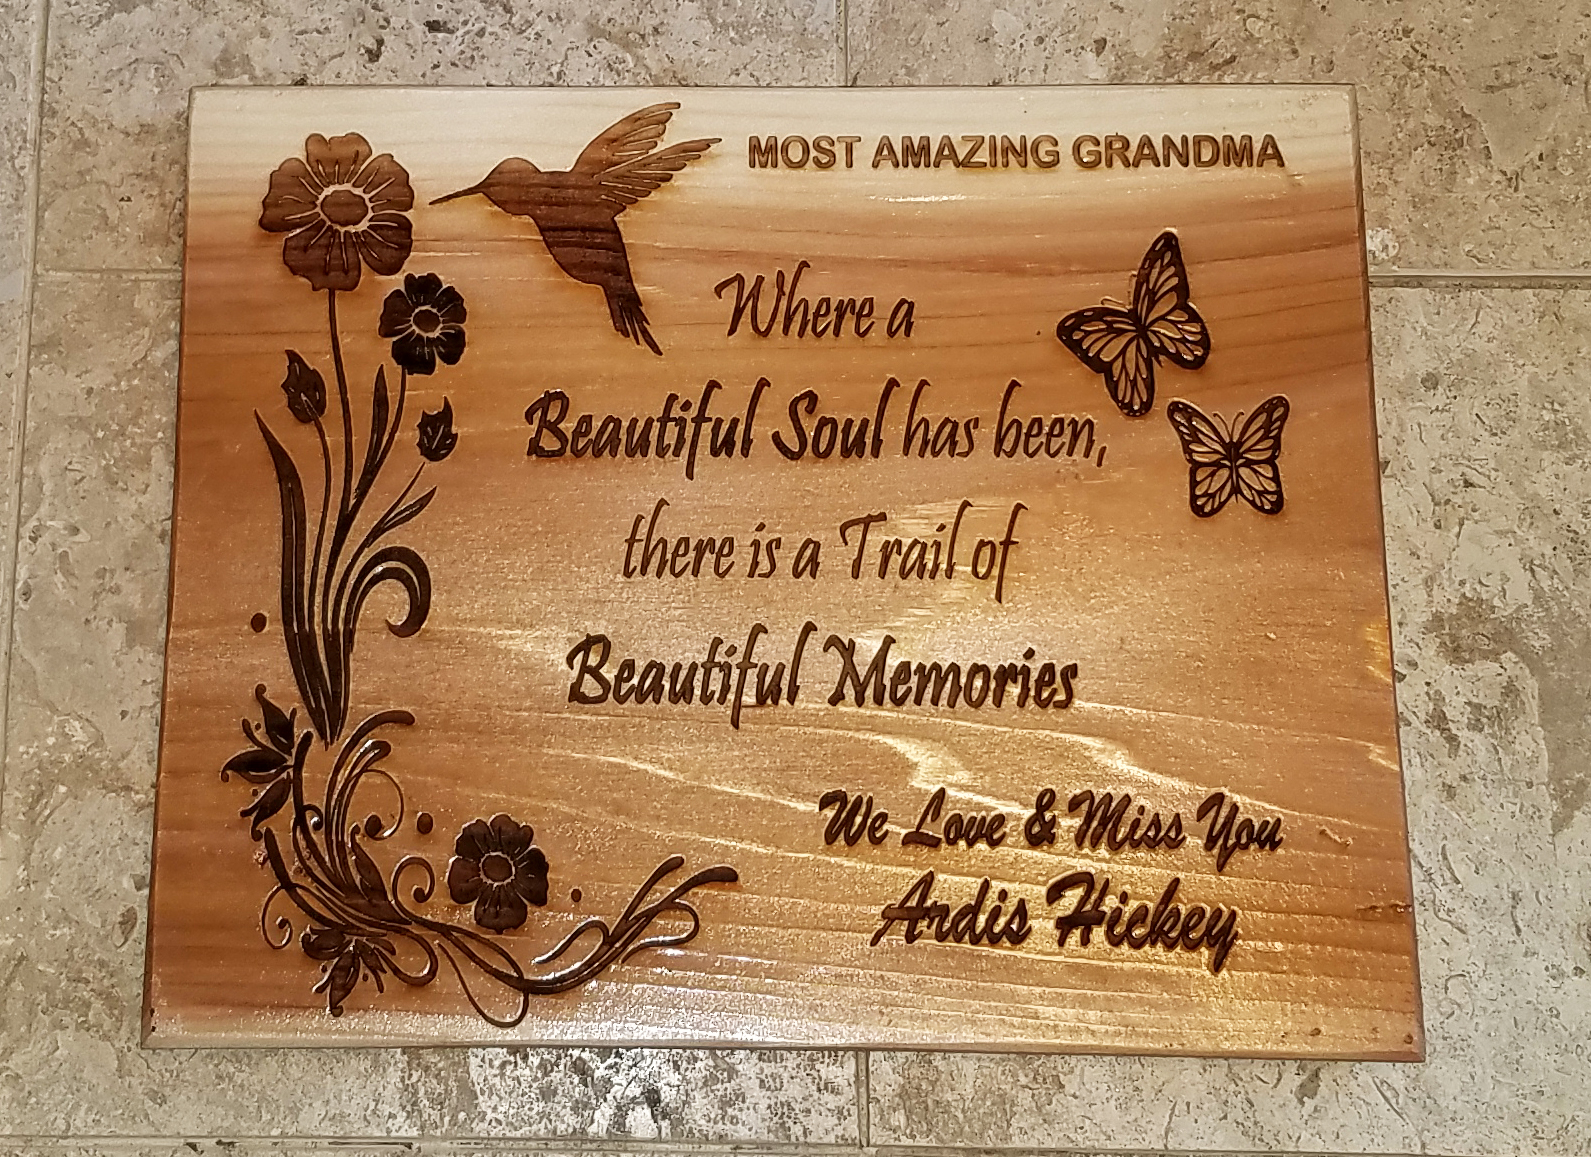 Most Amazing Grandma Memorial Plaque made out of Cedar Board that was clear-coated and says: Where a Beautiful Soul has Been, There is a Trail of Beautiful Memories Quote.